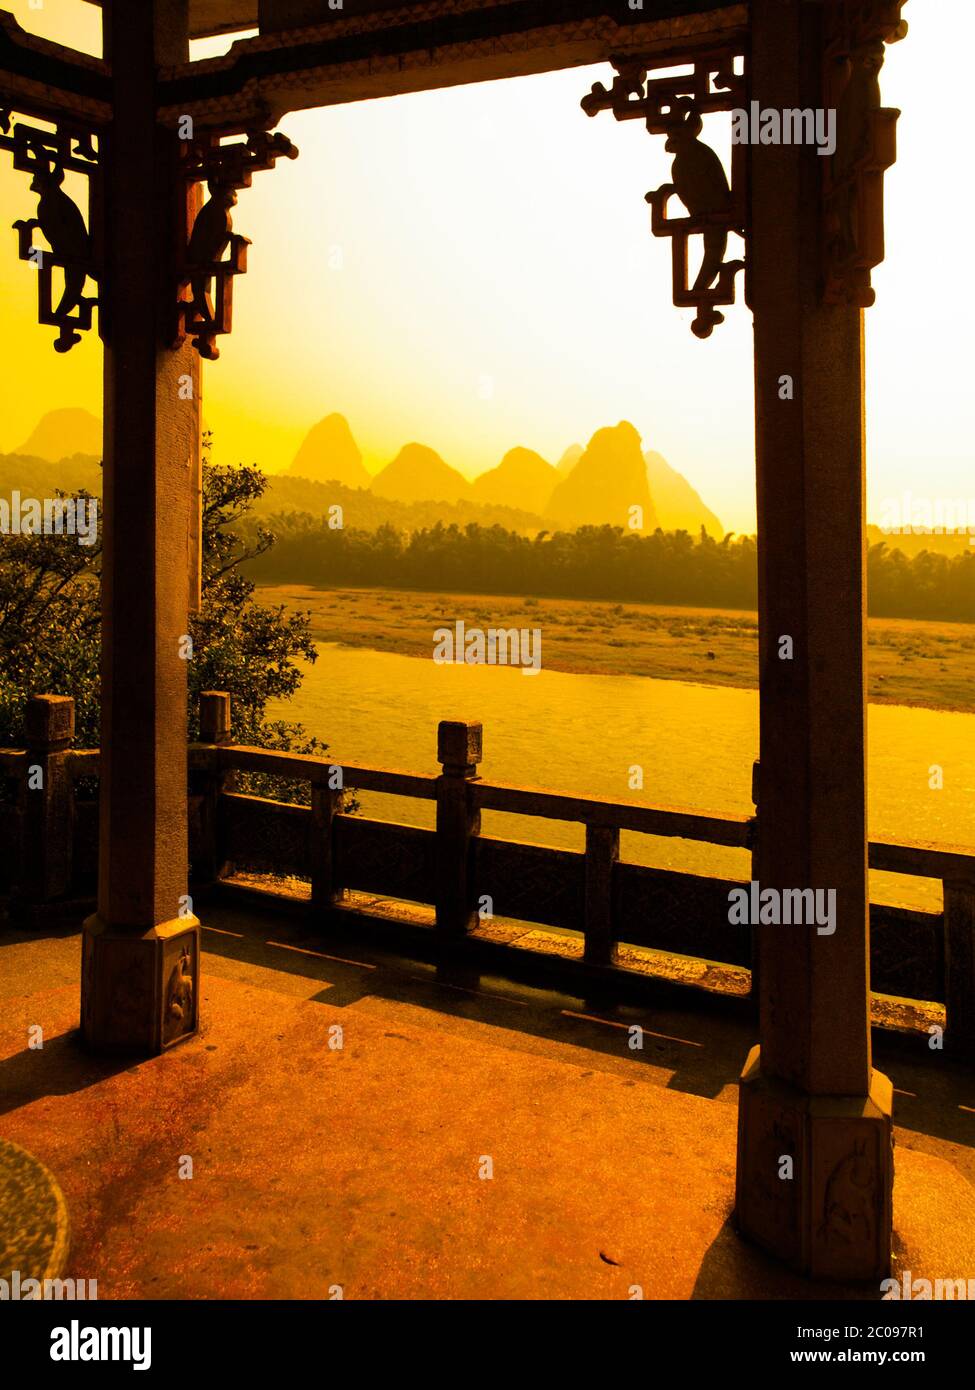 Sunset in karst landscape around Yangshuo an Li River with peaks silhouettes, Guangxi Province, China. View from terrace with ornamental columns. Stock Photo